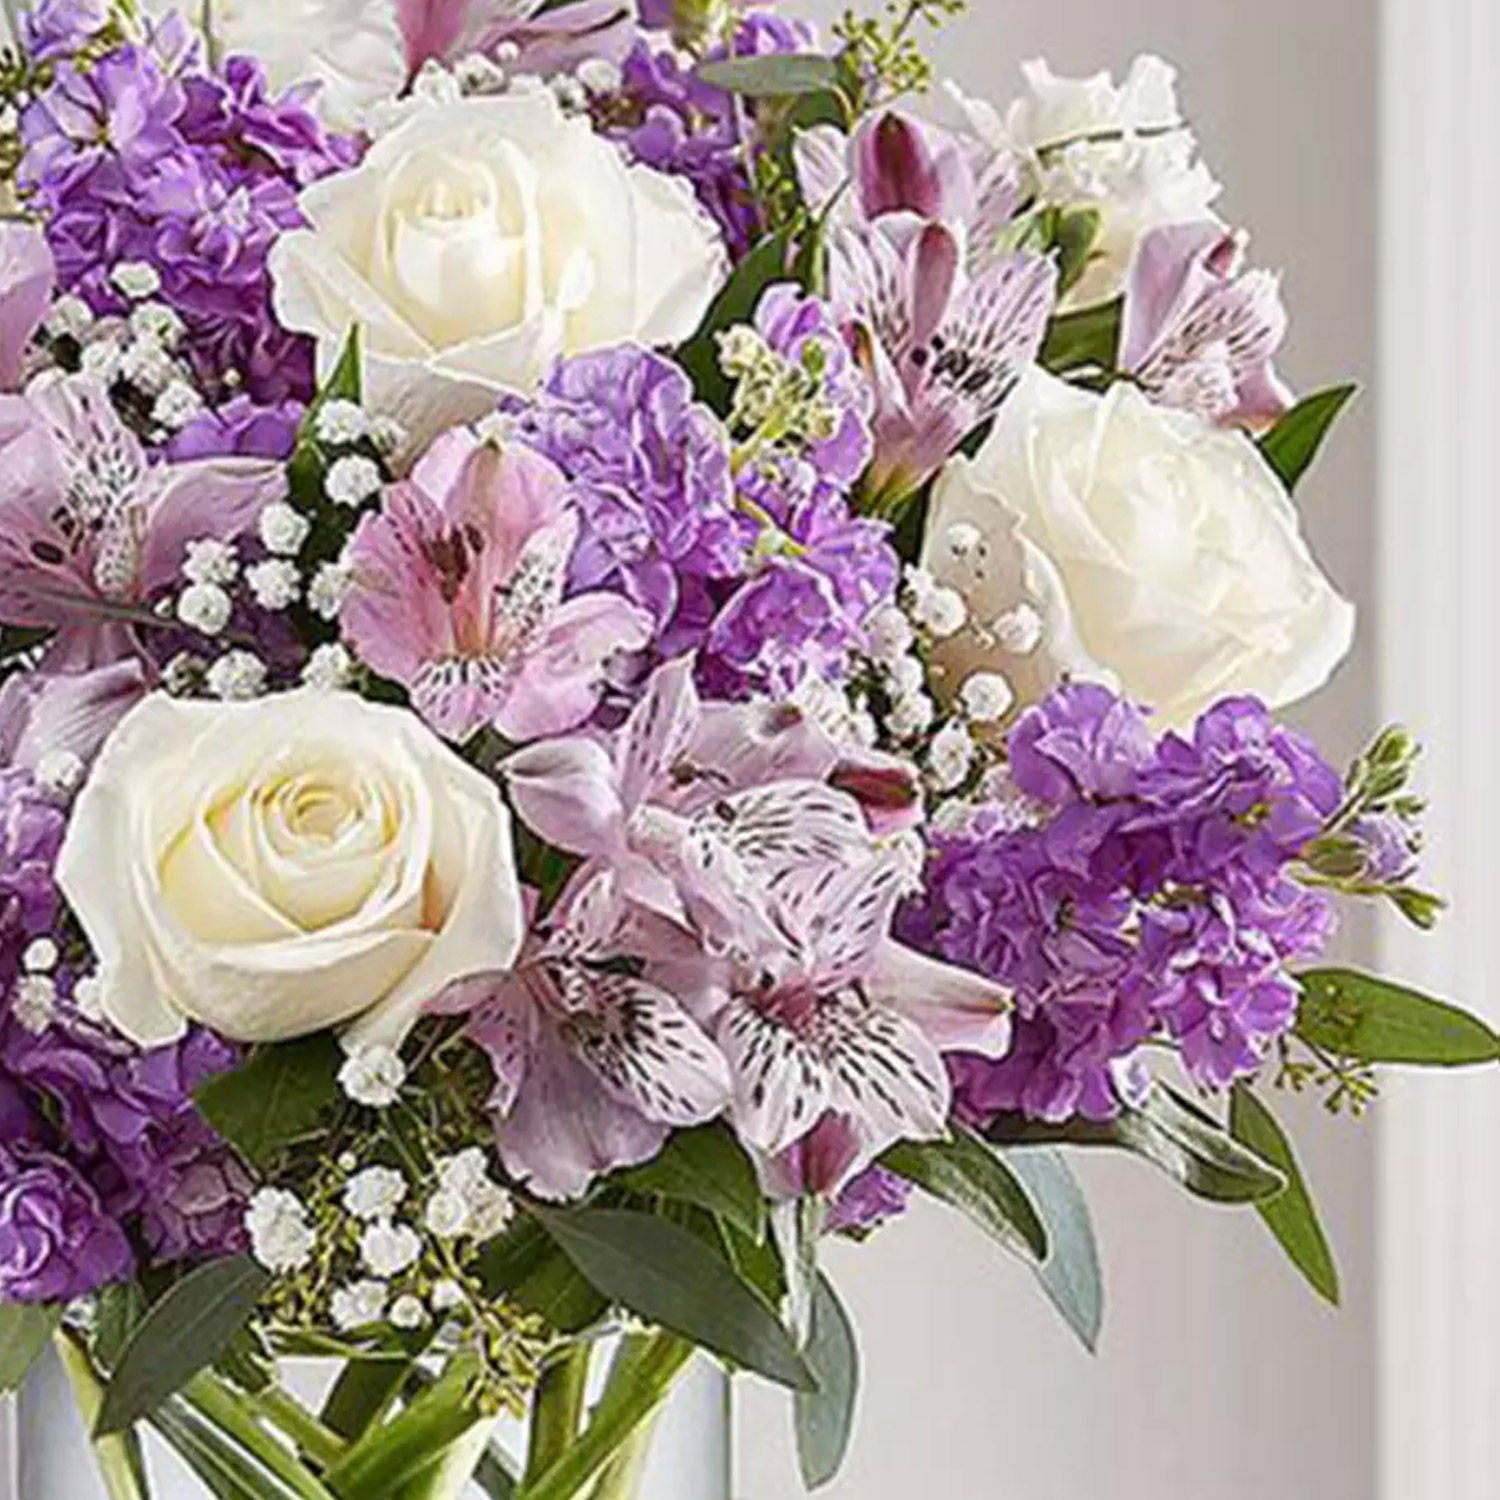 Purple and White Floral Bunch In Glass Vase